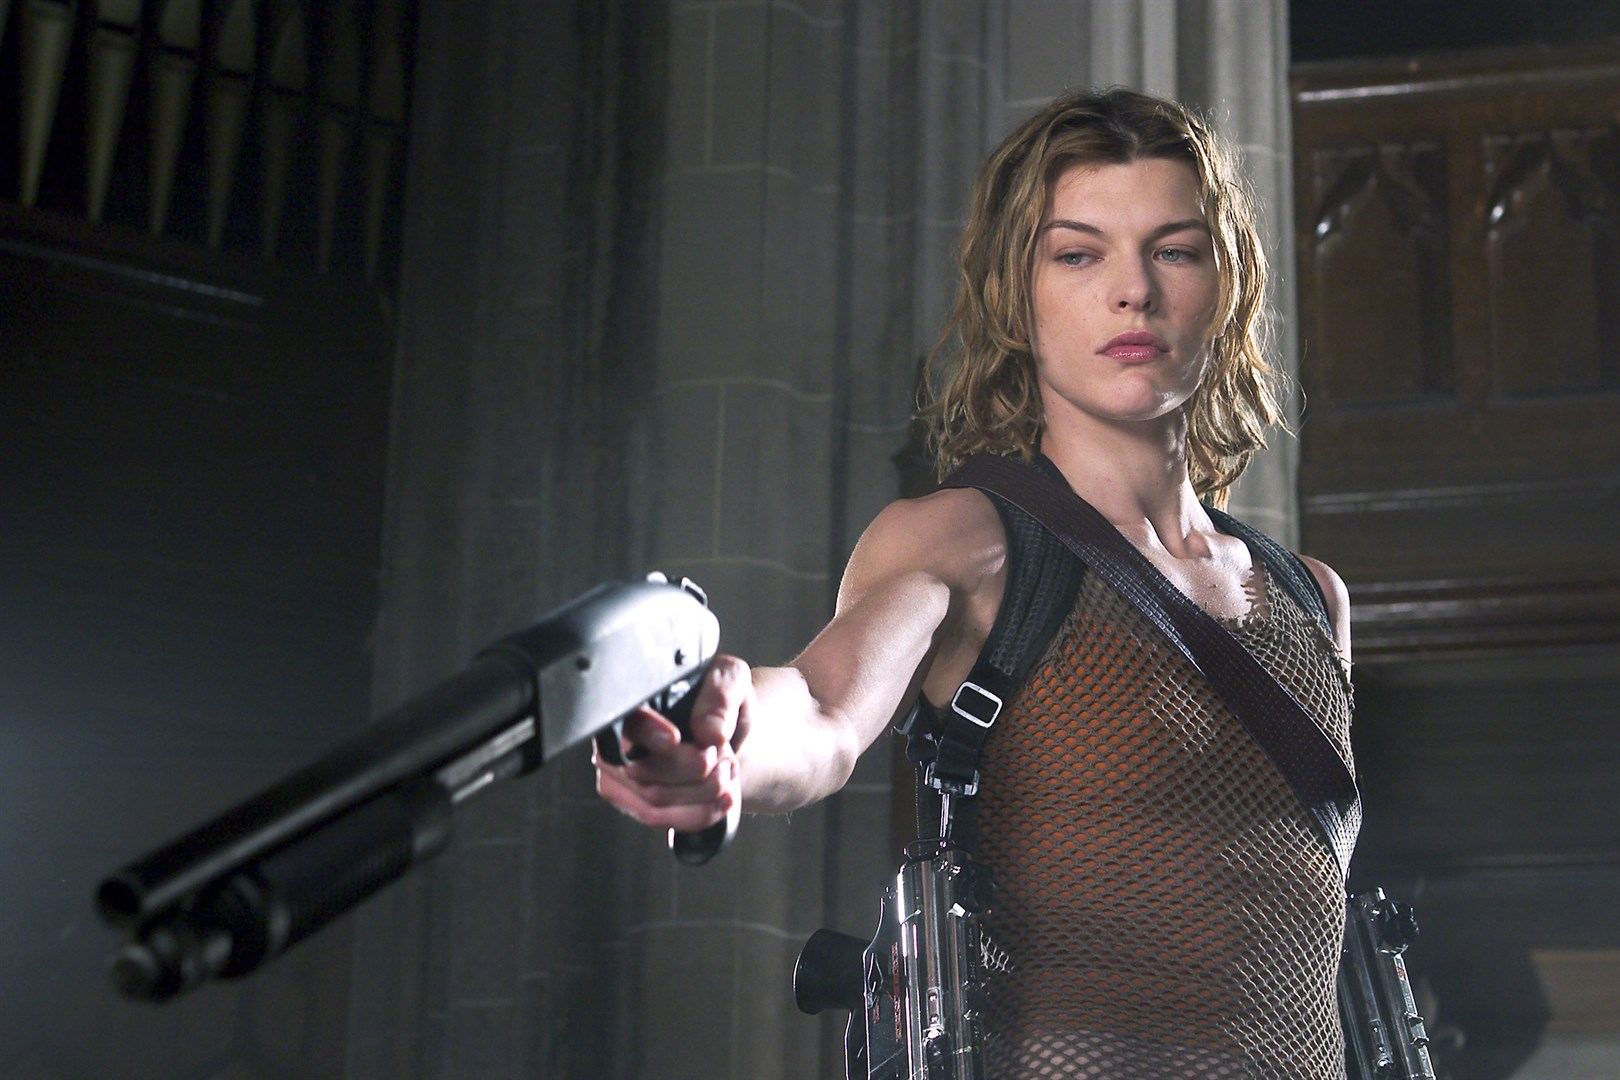 Resident Evil: Afterlife Kills at Box Office